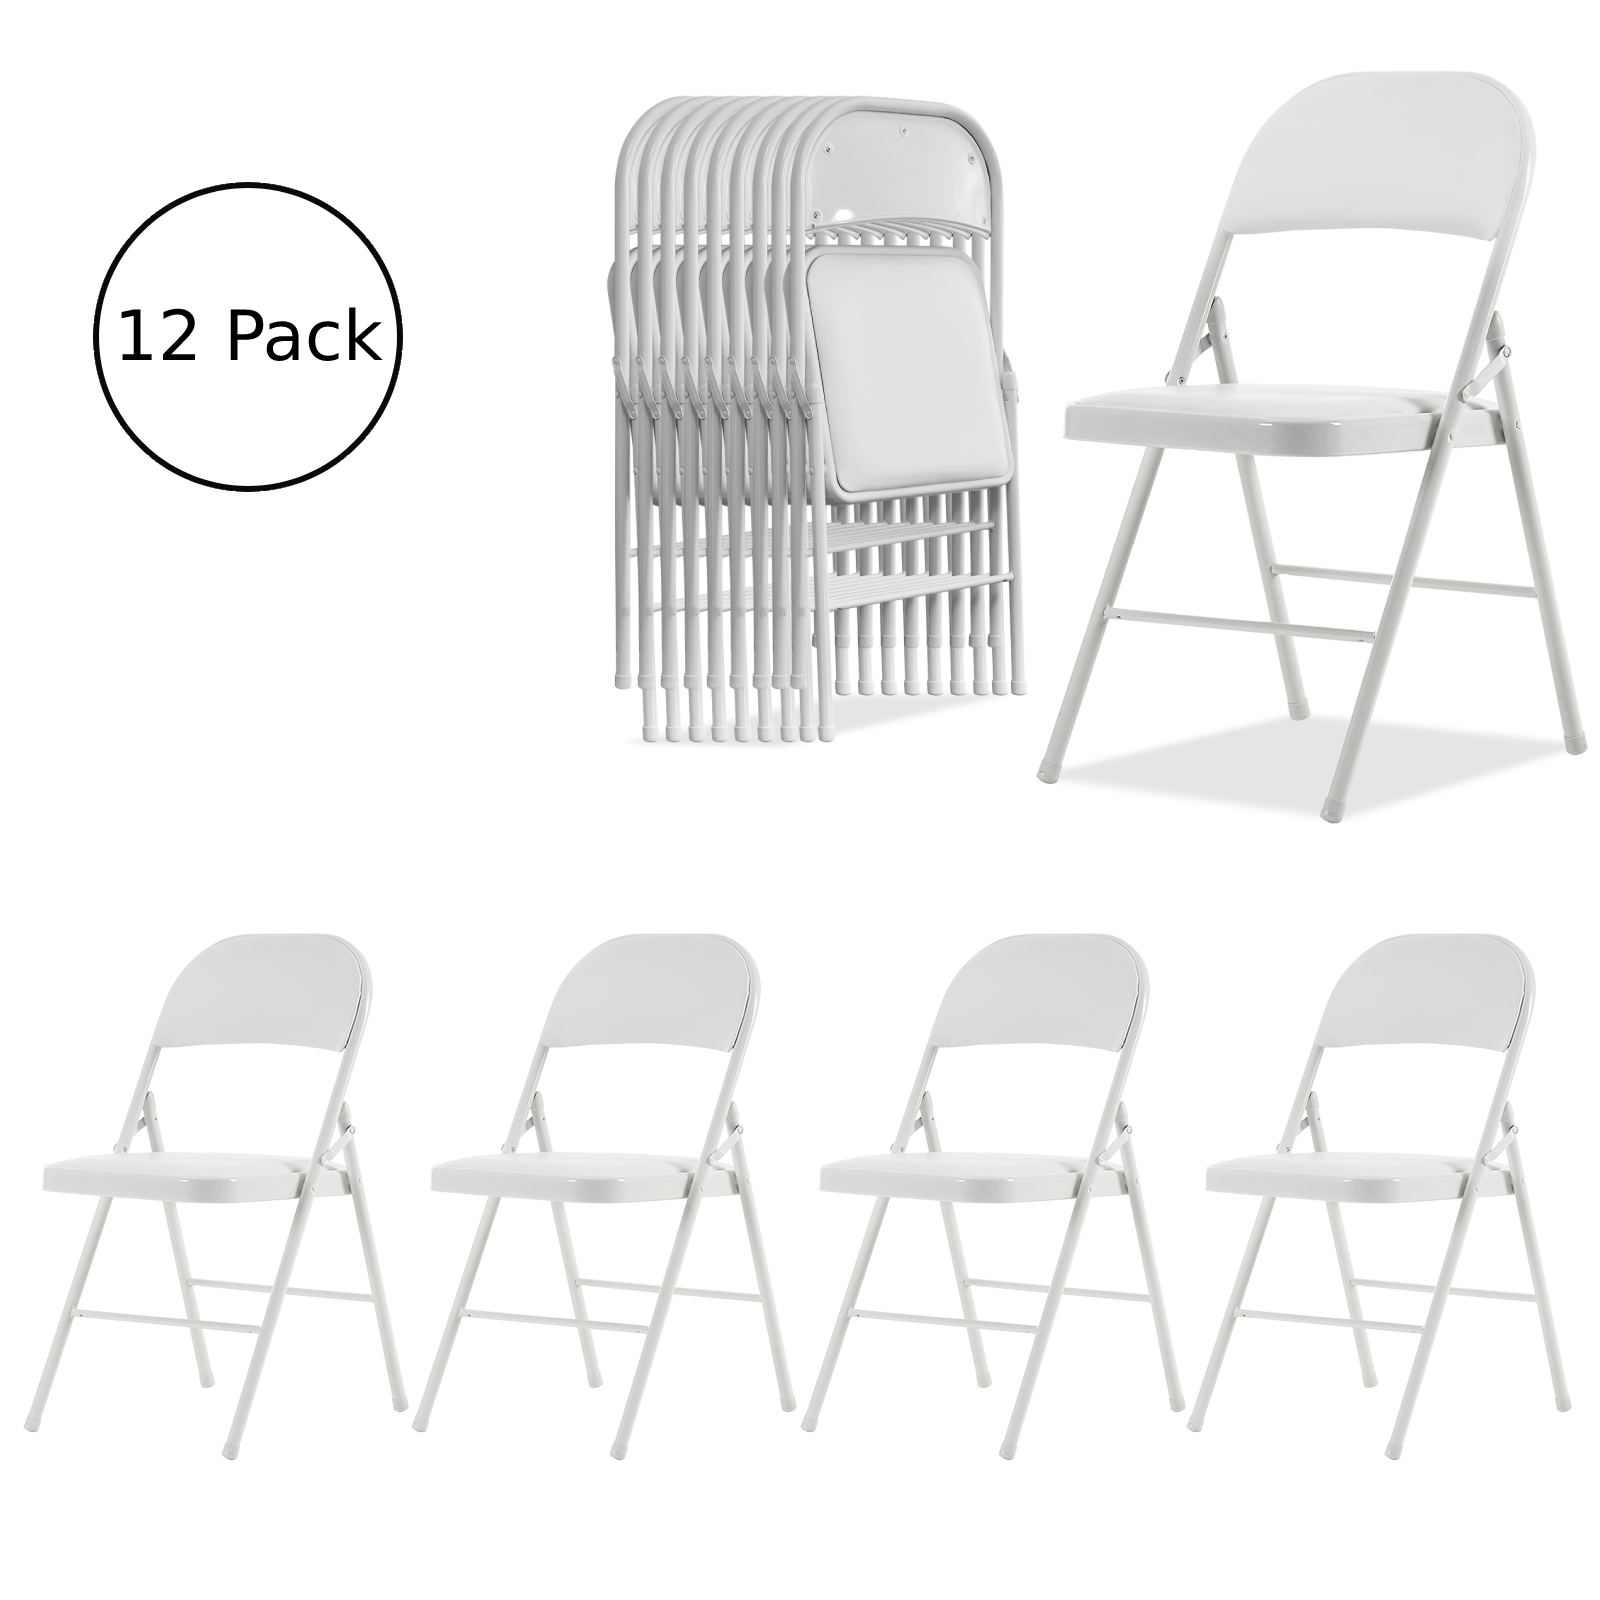 UBesGoo Set of 12 Padded Folding Chair Portable Dining Chairs Heavy Duty Party Chairs with Metal Frame White - image 1 of 10